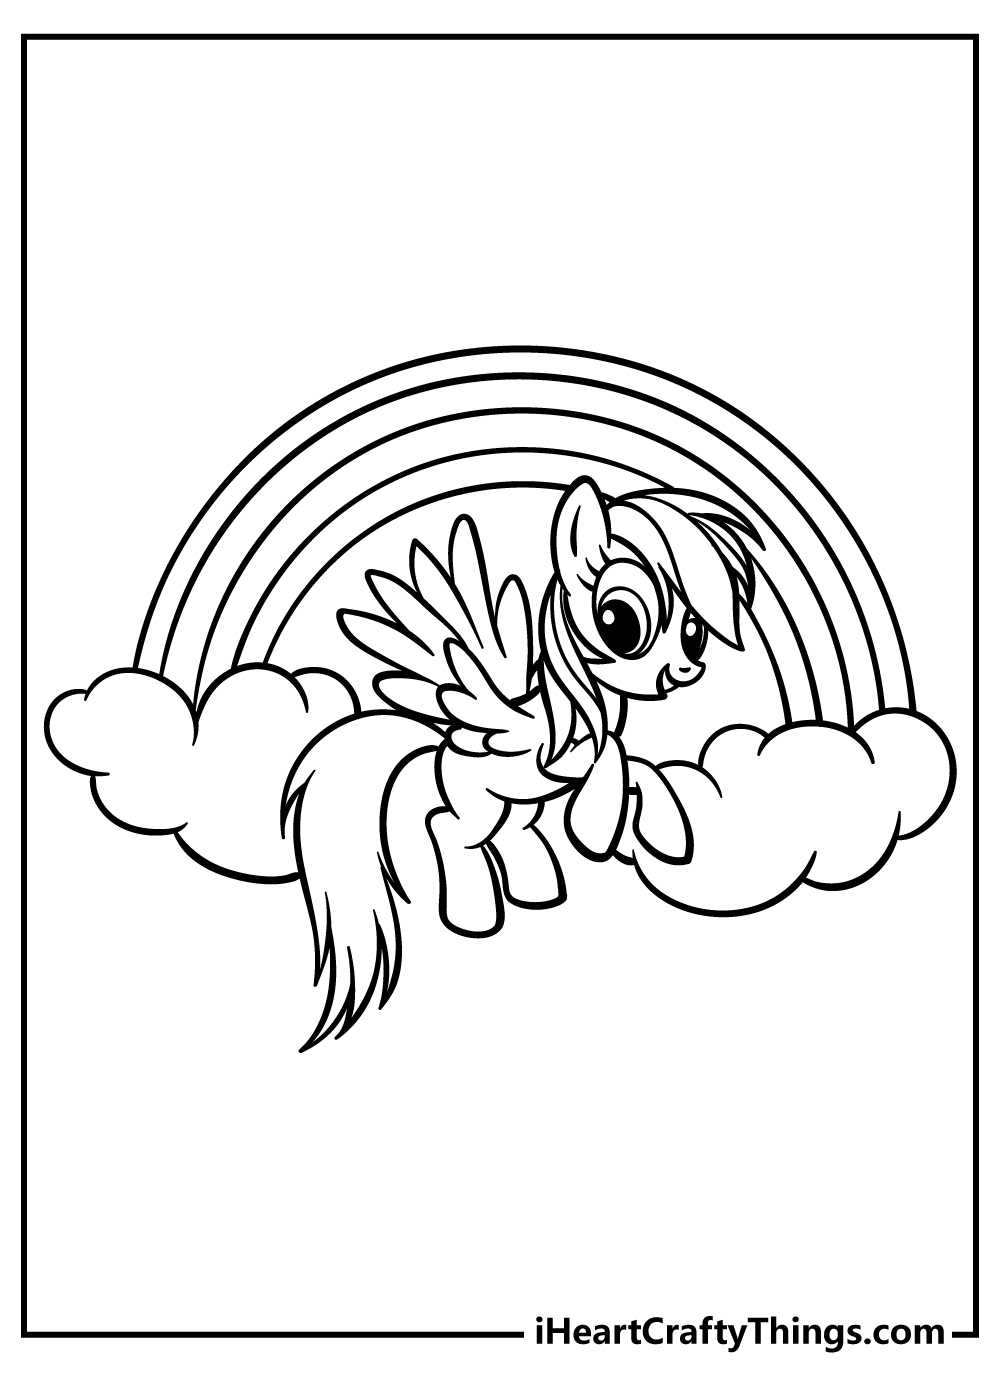 Rainbow Dash Coloring Pages for adults free printable